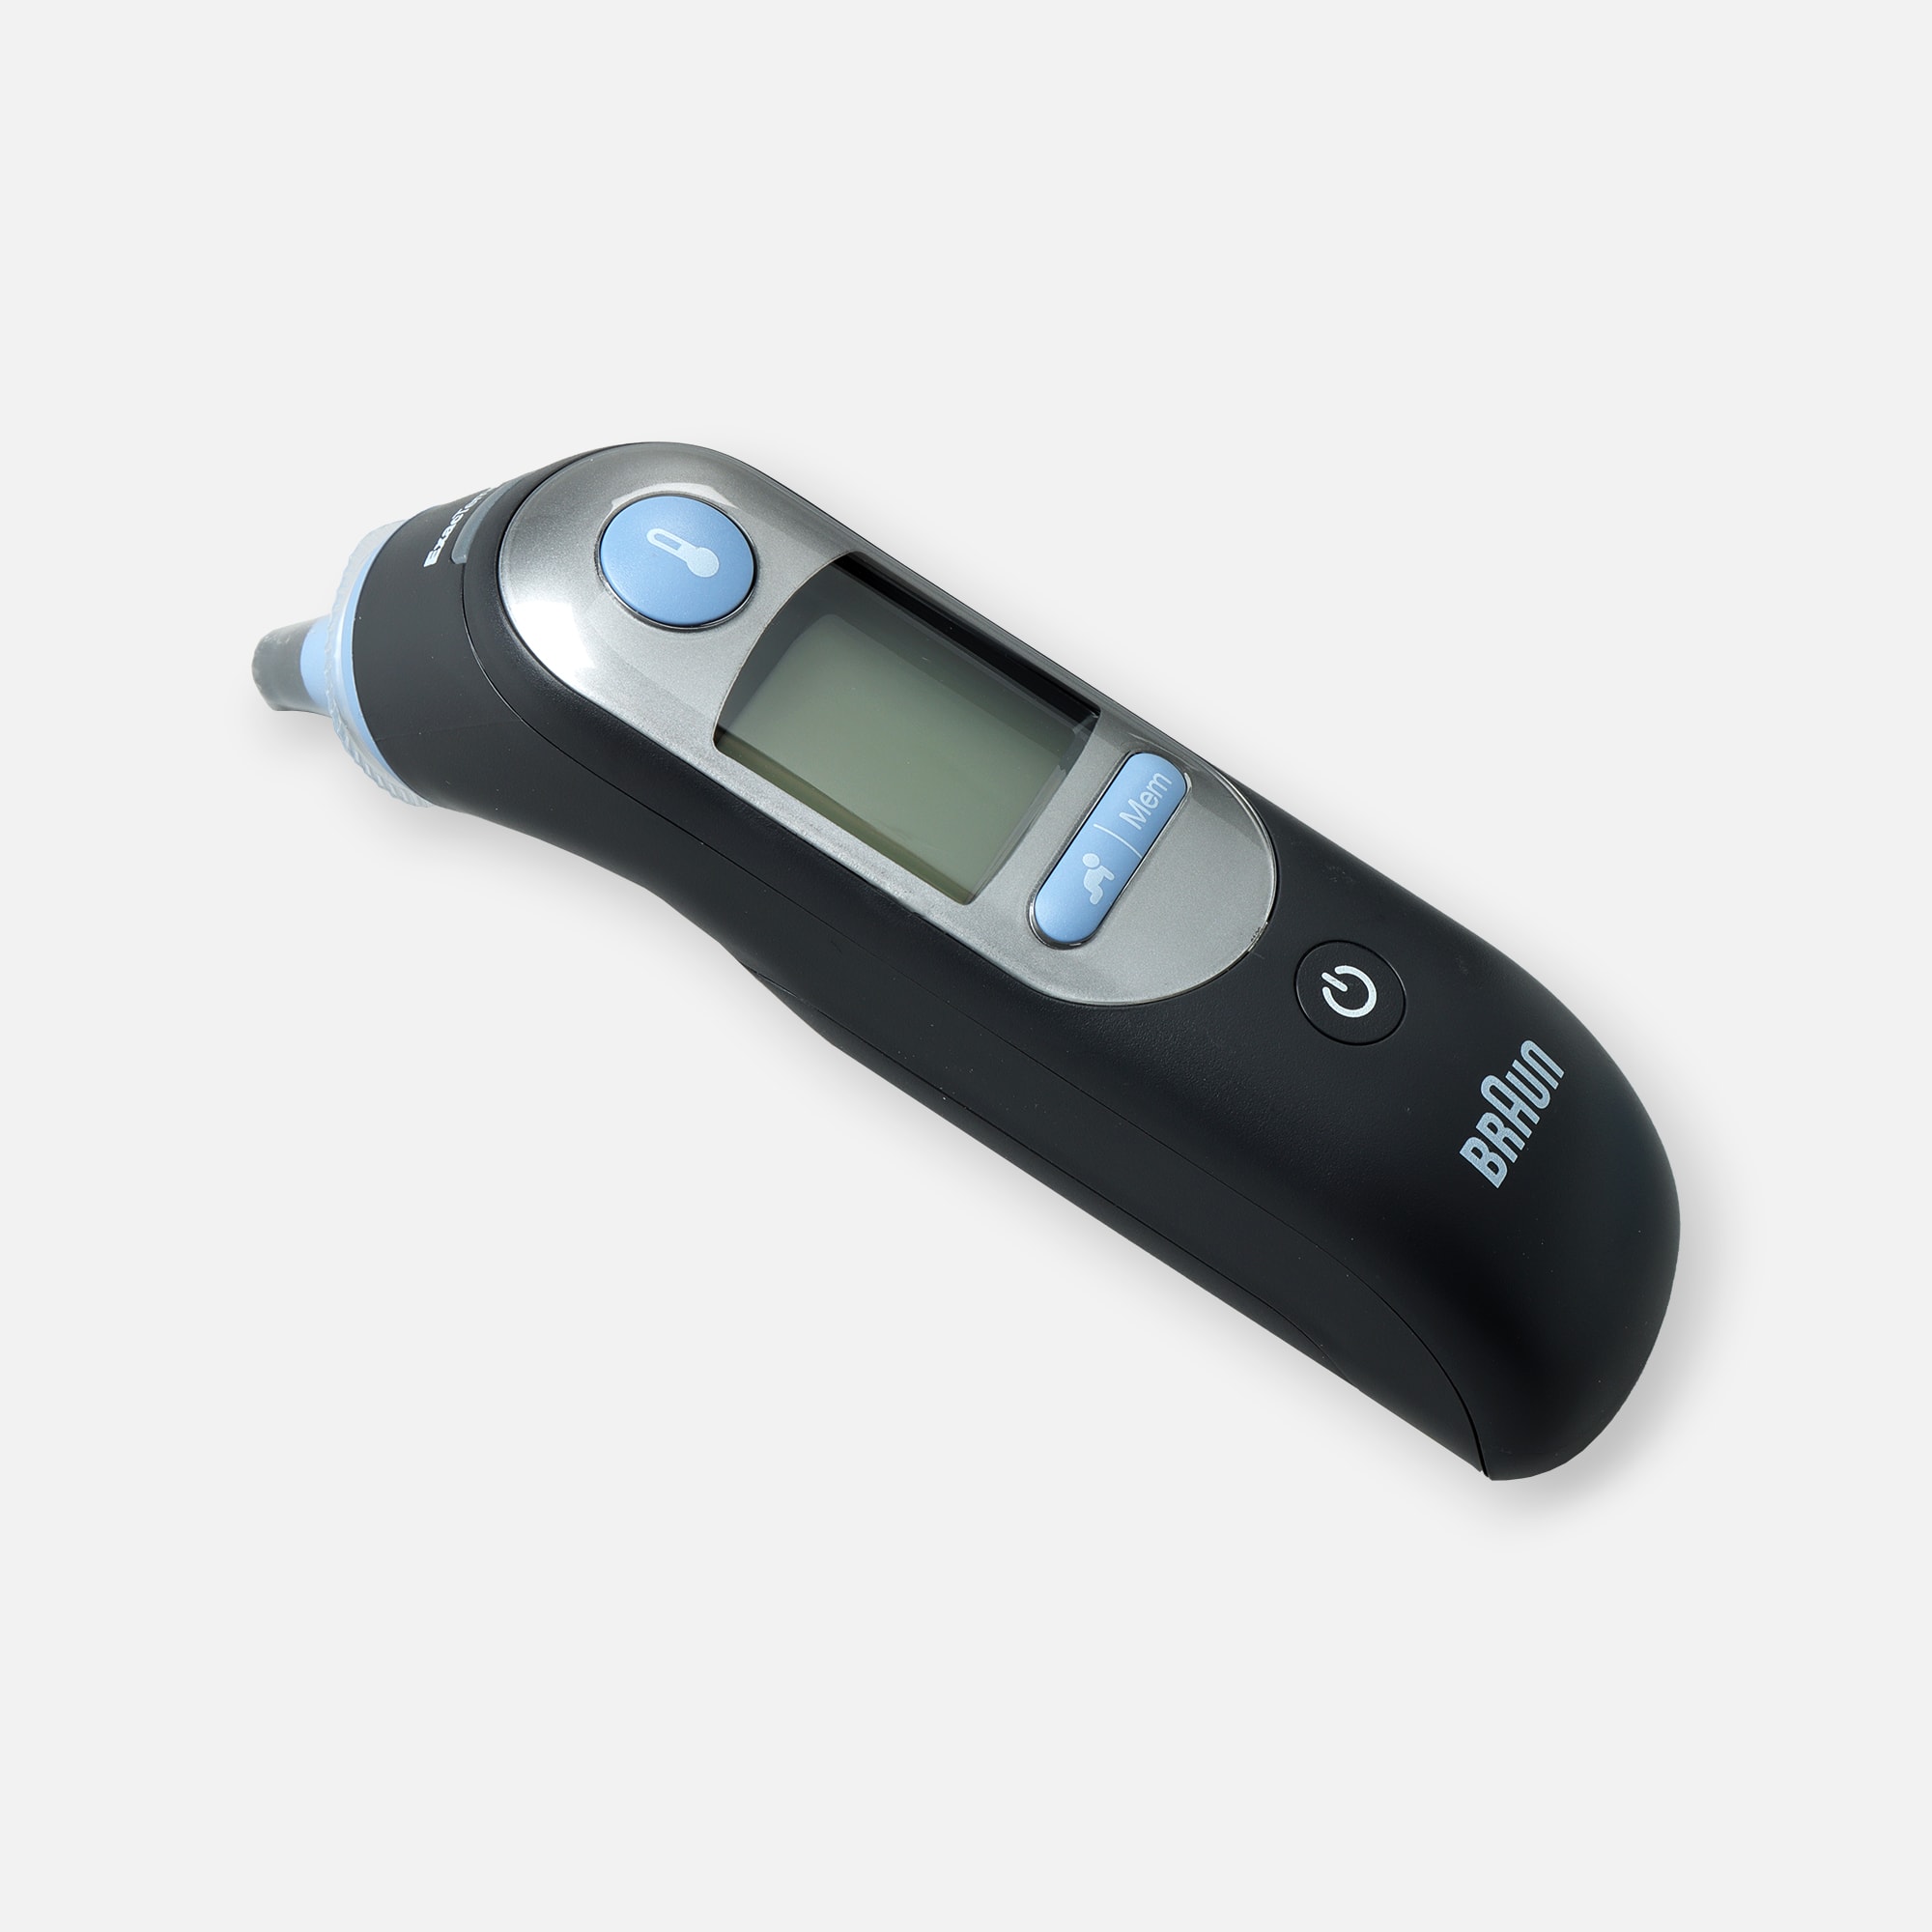 https://fsastore.com/on/demandware.static/-/Sites-hec-master/default/dw9399b036/images/large/braun-thermo-scan-7-ear-thermometer-26471-6.jpg